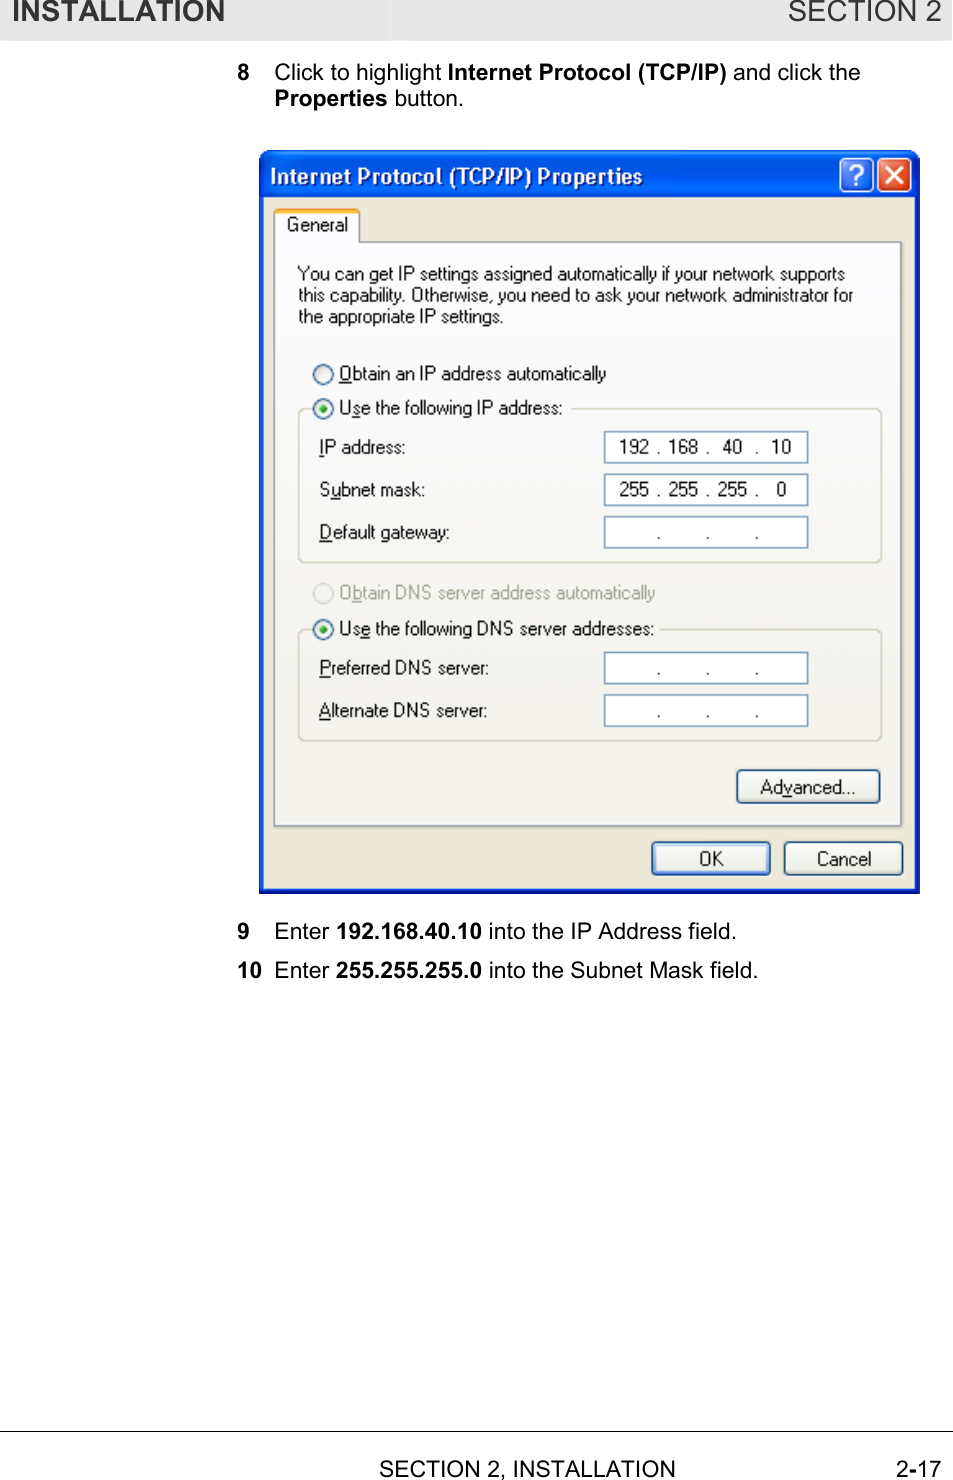 INSTALLATION SECTION 2  SECTION 2, INSTALLATION 2-17 8  Click to highlight Internet Protocol (TCP/IP) and click the Properties button.  9  Enter 192.168.40.10 into the IP Address field. 10  Enter 255.255.255.0 into the Subnet Mask field. 